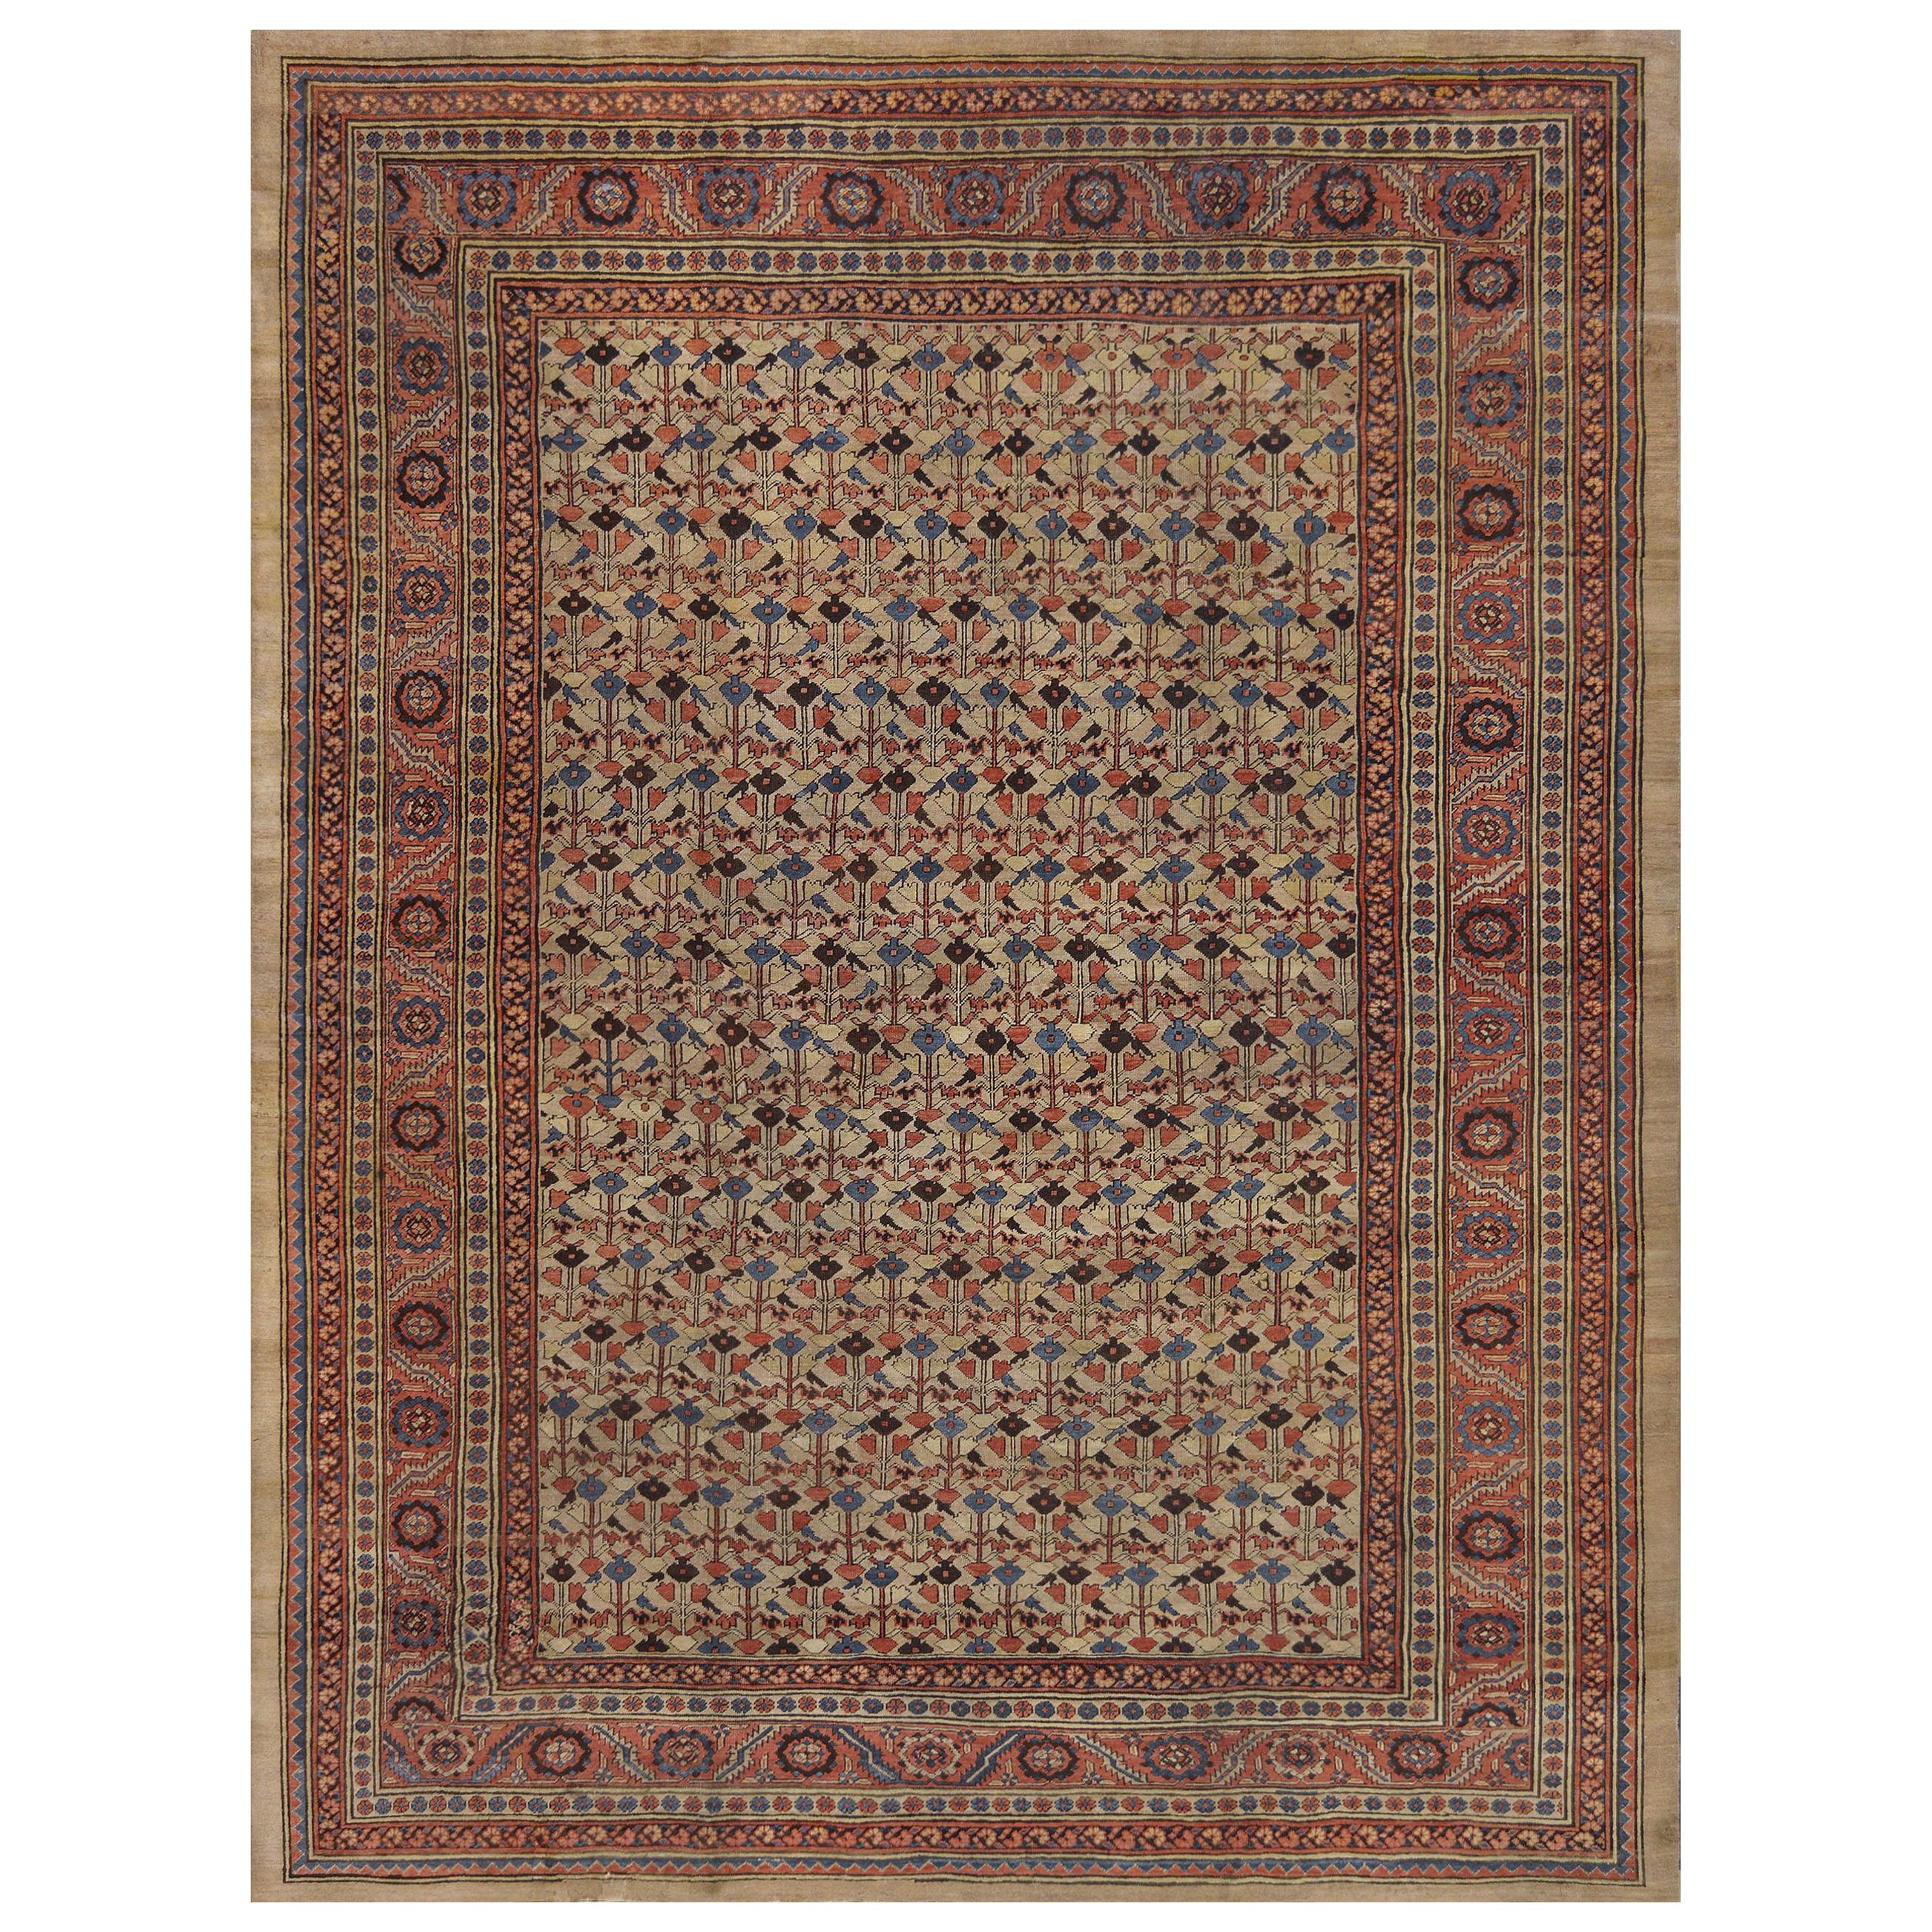 Late 19th Century Wool Bakhshaish Rug from North West Persia For Sale